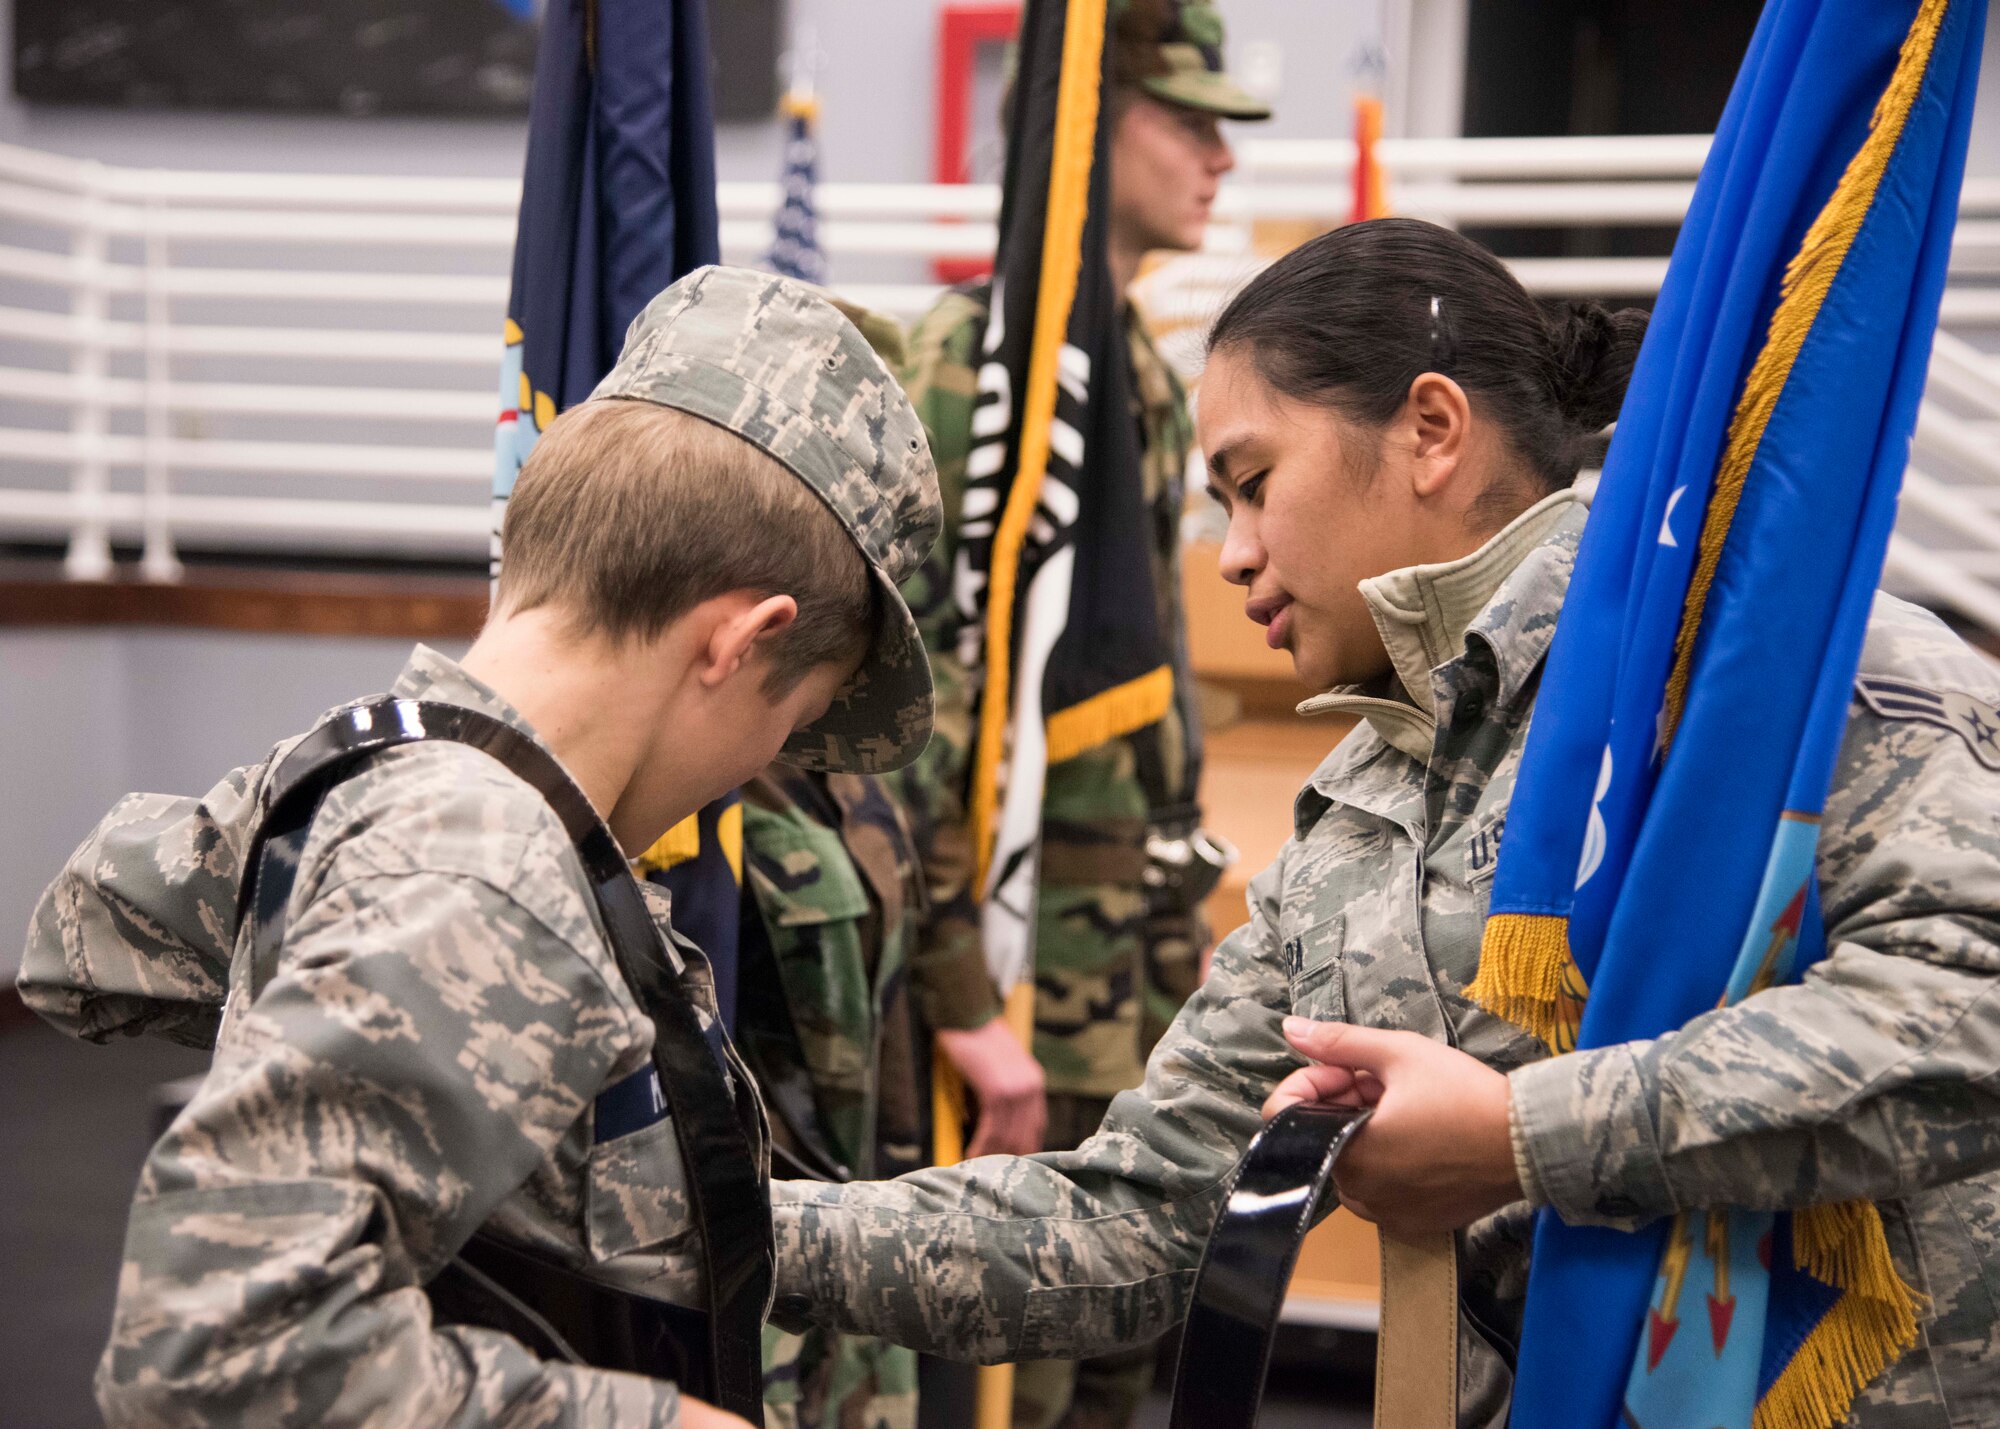 Christian Maple, Civil Air Patrol Spokane Composite Squadron cadet, receives assistance from Airman 1st Class Larrah Lara, 92nd Air Refueling Wing Honor Guardsmen, while practicing "presenting colors" at Fairchild Air Force Base, Washington, Nov. 26, 2018. Fairchild Honor Guard teams are composed of Airmen from different career fields, bringing a diversity of age and experience. (U.S. Air Force photo/ Senior Airman Ryan Lackey)